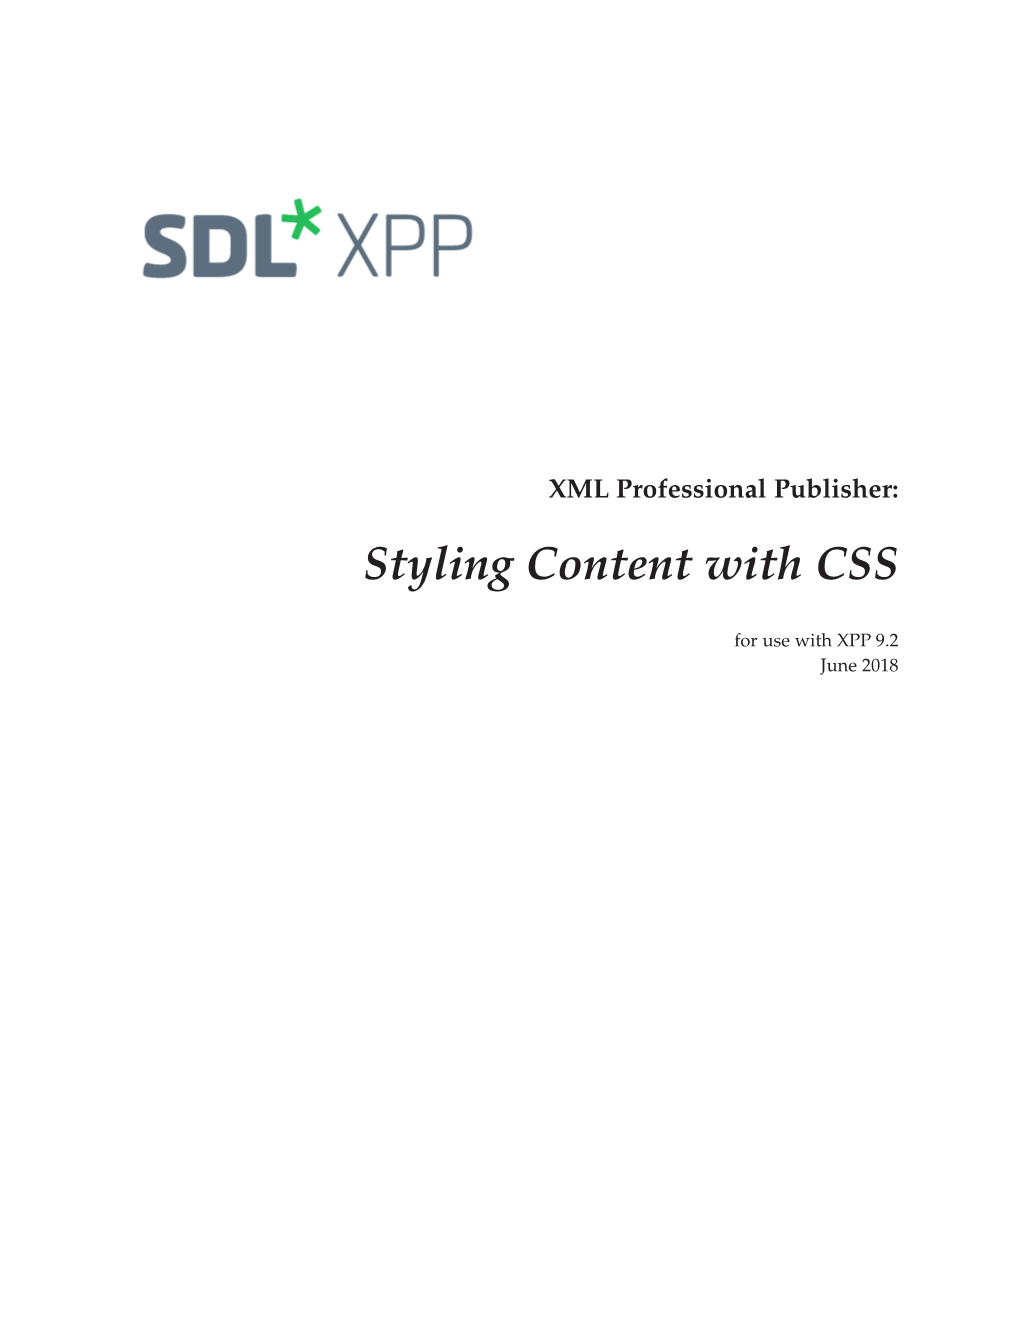 Styling Content with CSS